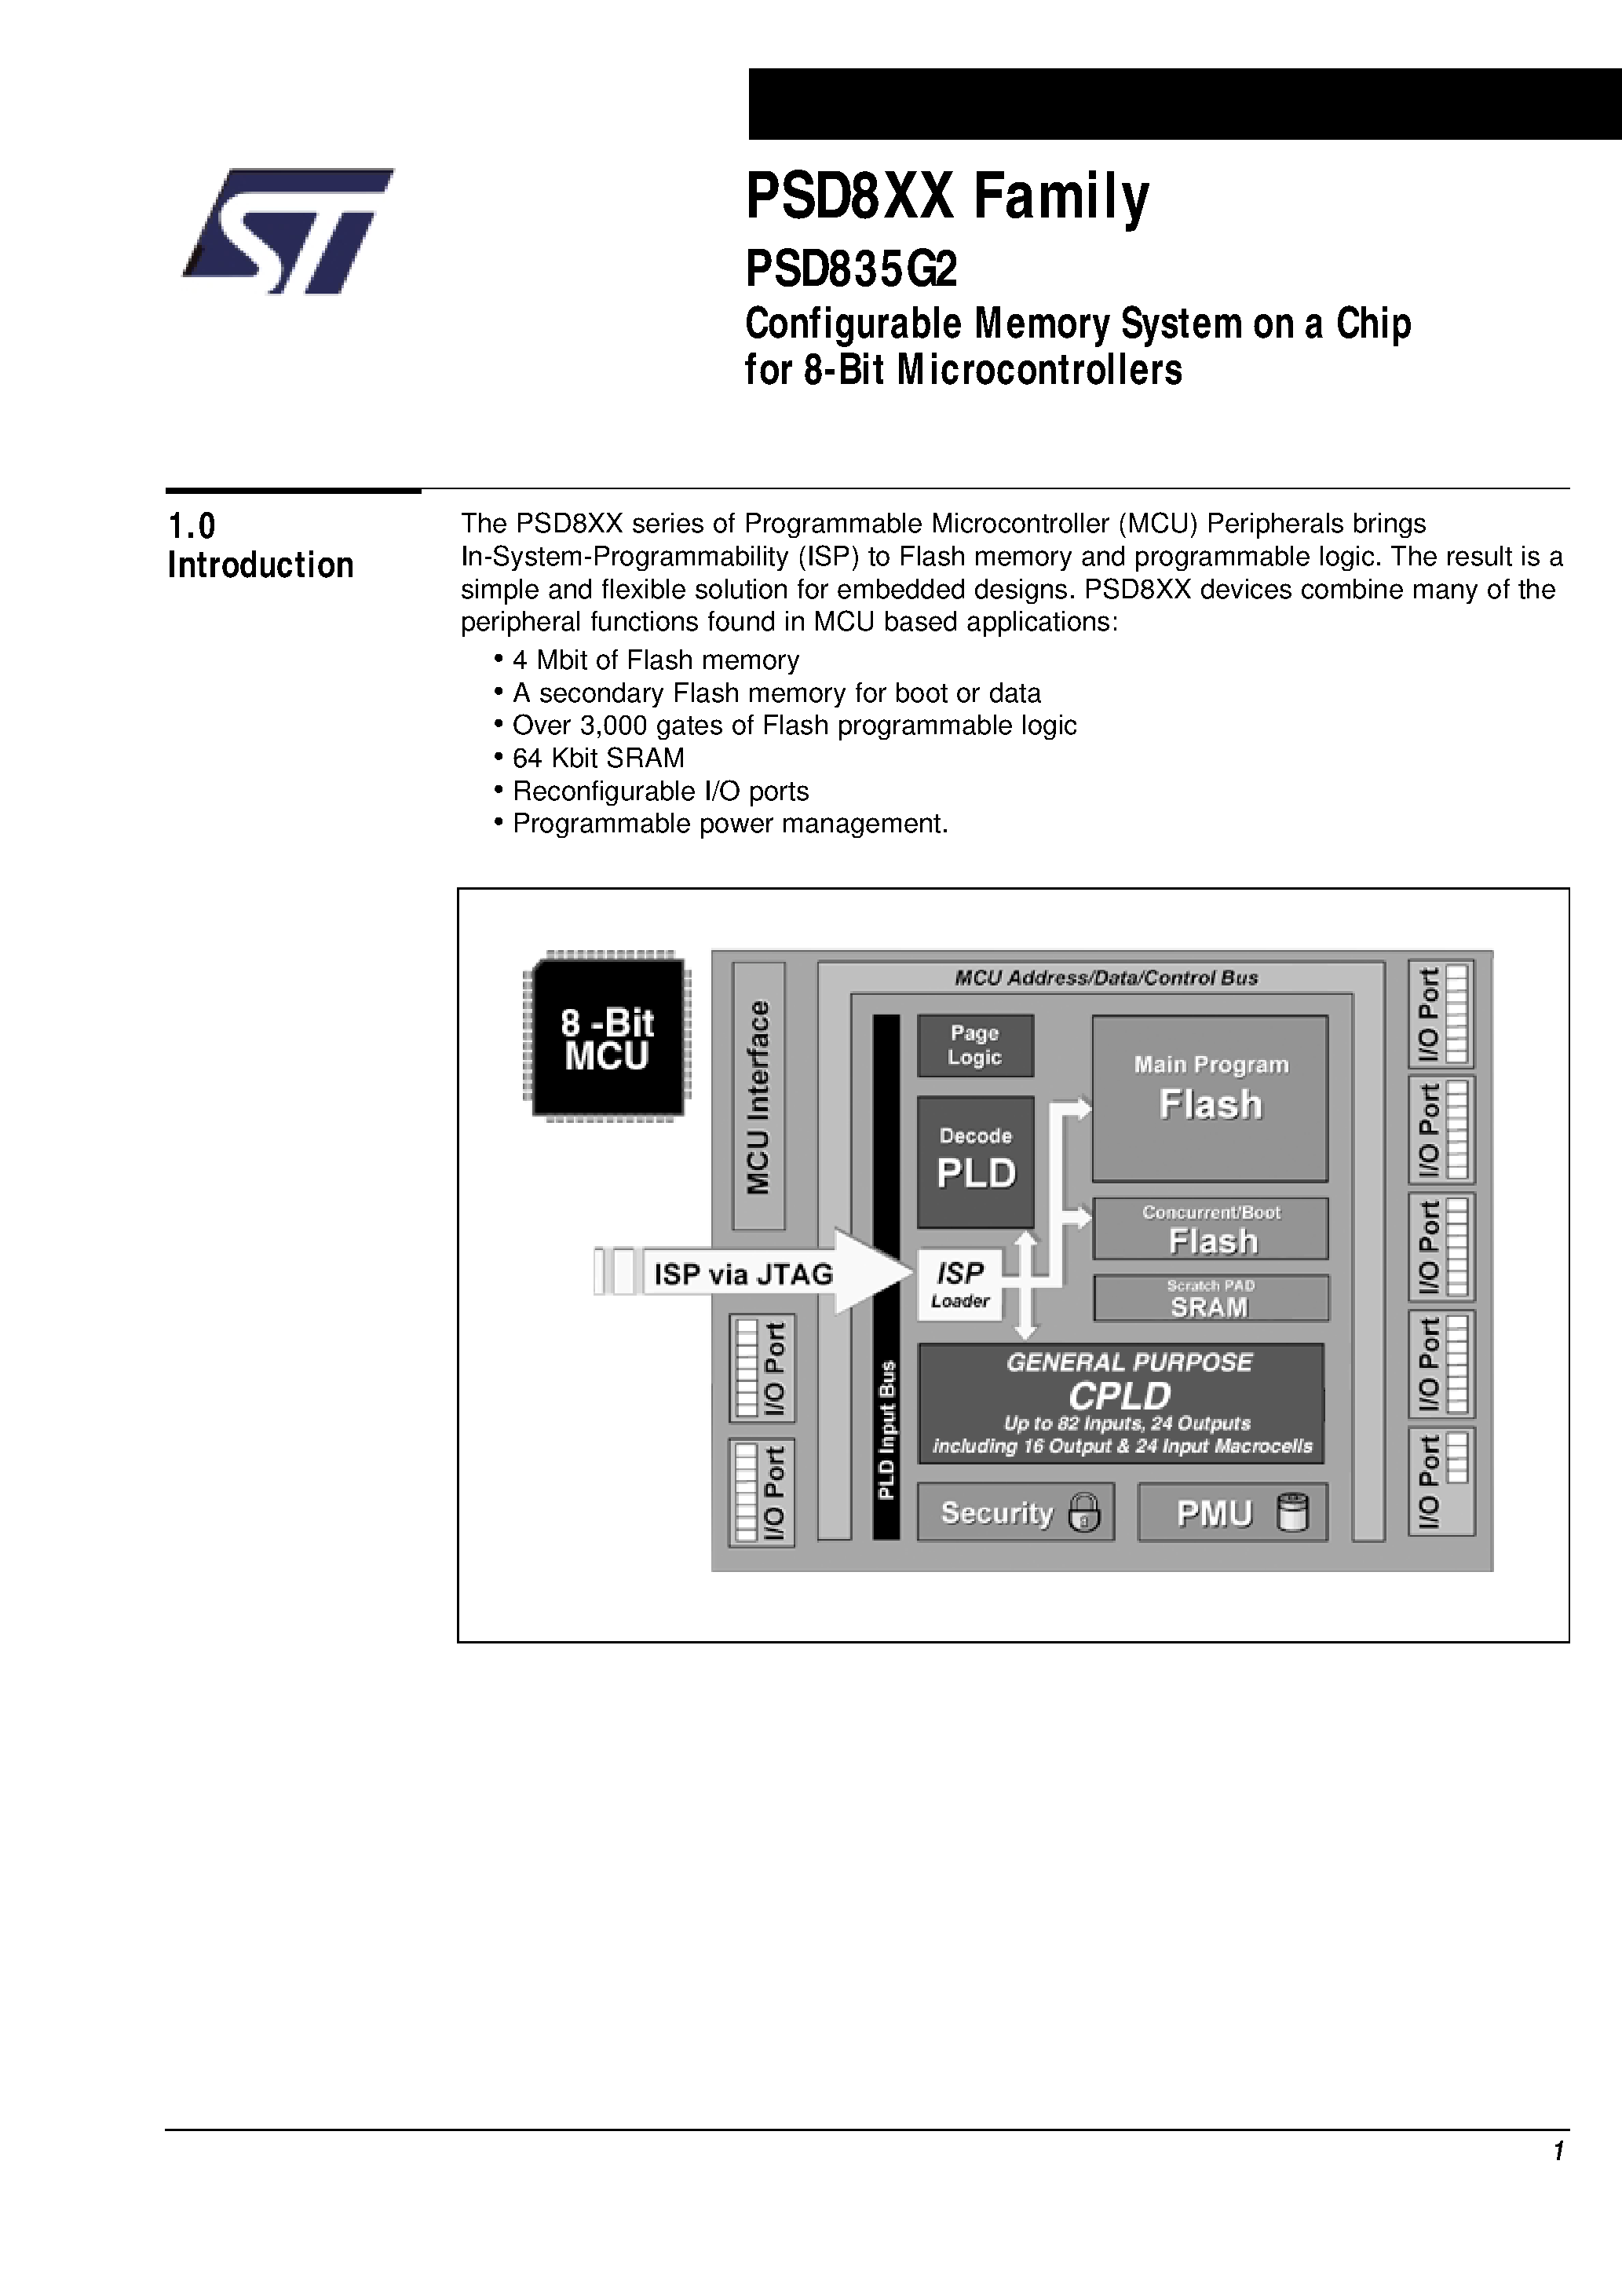 Datasheet PSD835F1V-A-20B81 - Configurable Memory System on a Chip for 8-Bit Microcontrollers page 2